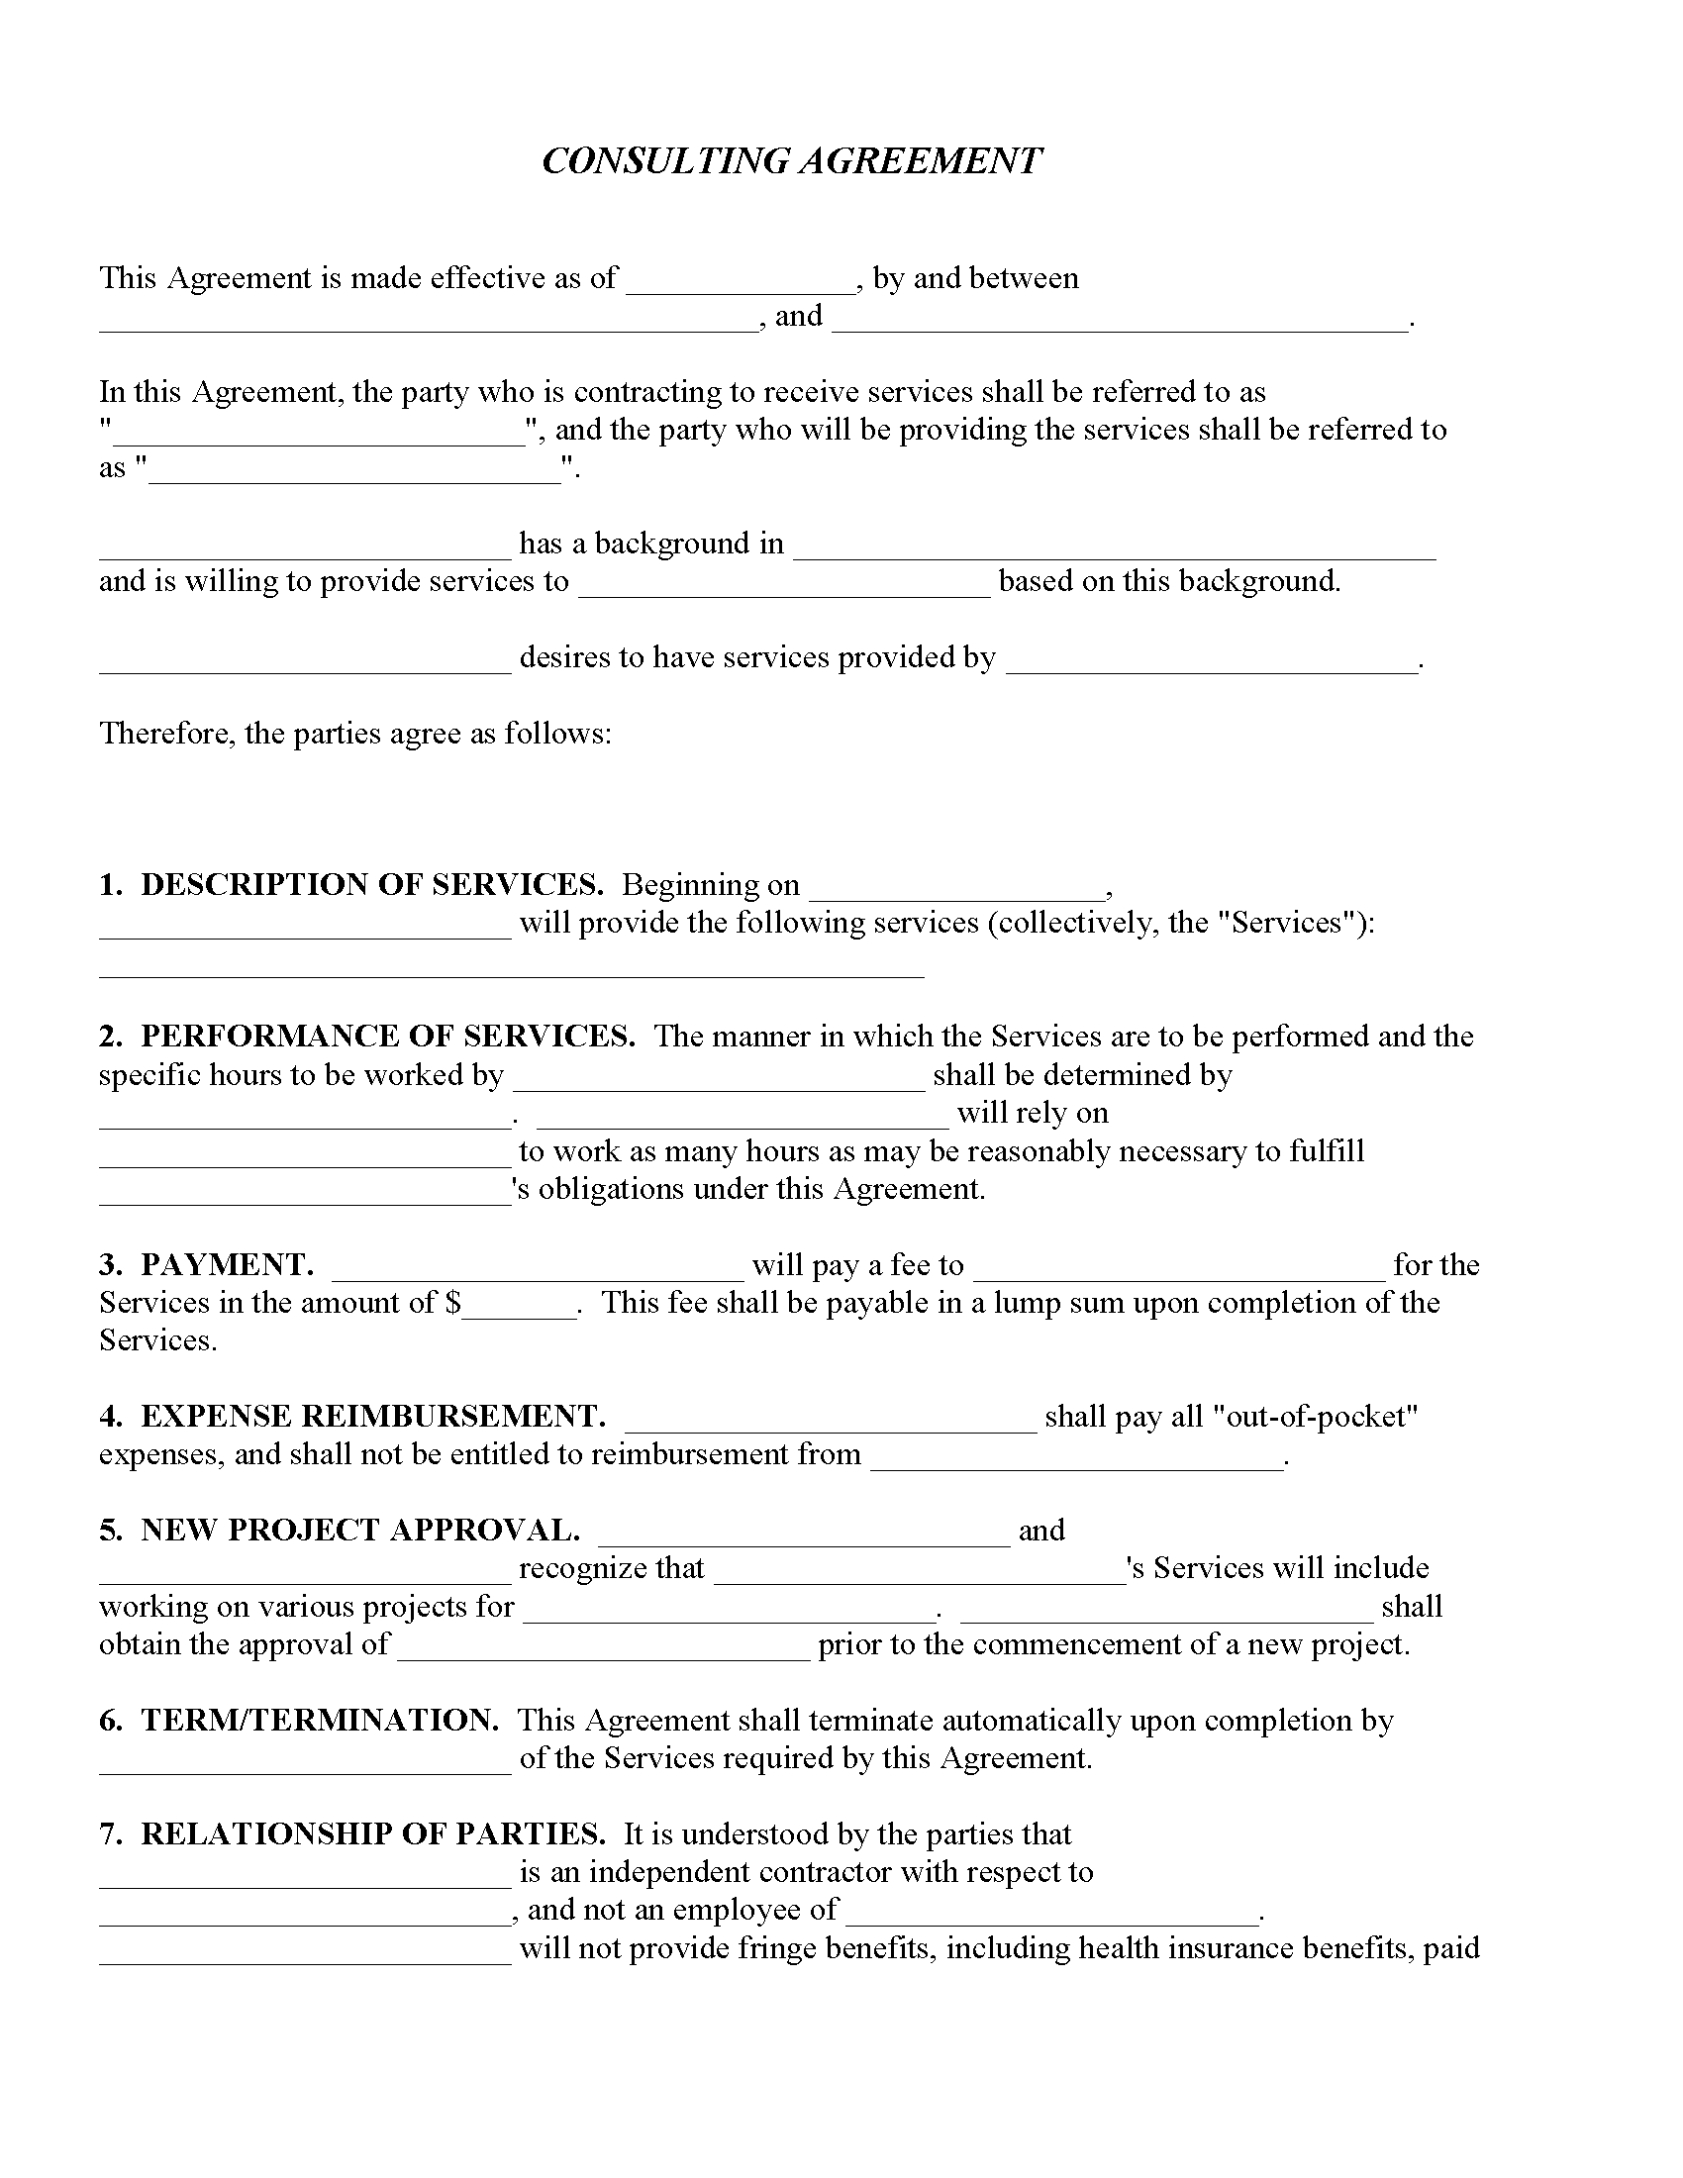 Consulting Agreement - Fillable Pdf - Free Printable Legal Forms For Consulting Service Agreement Template